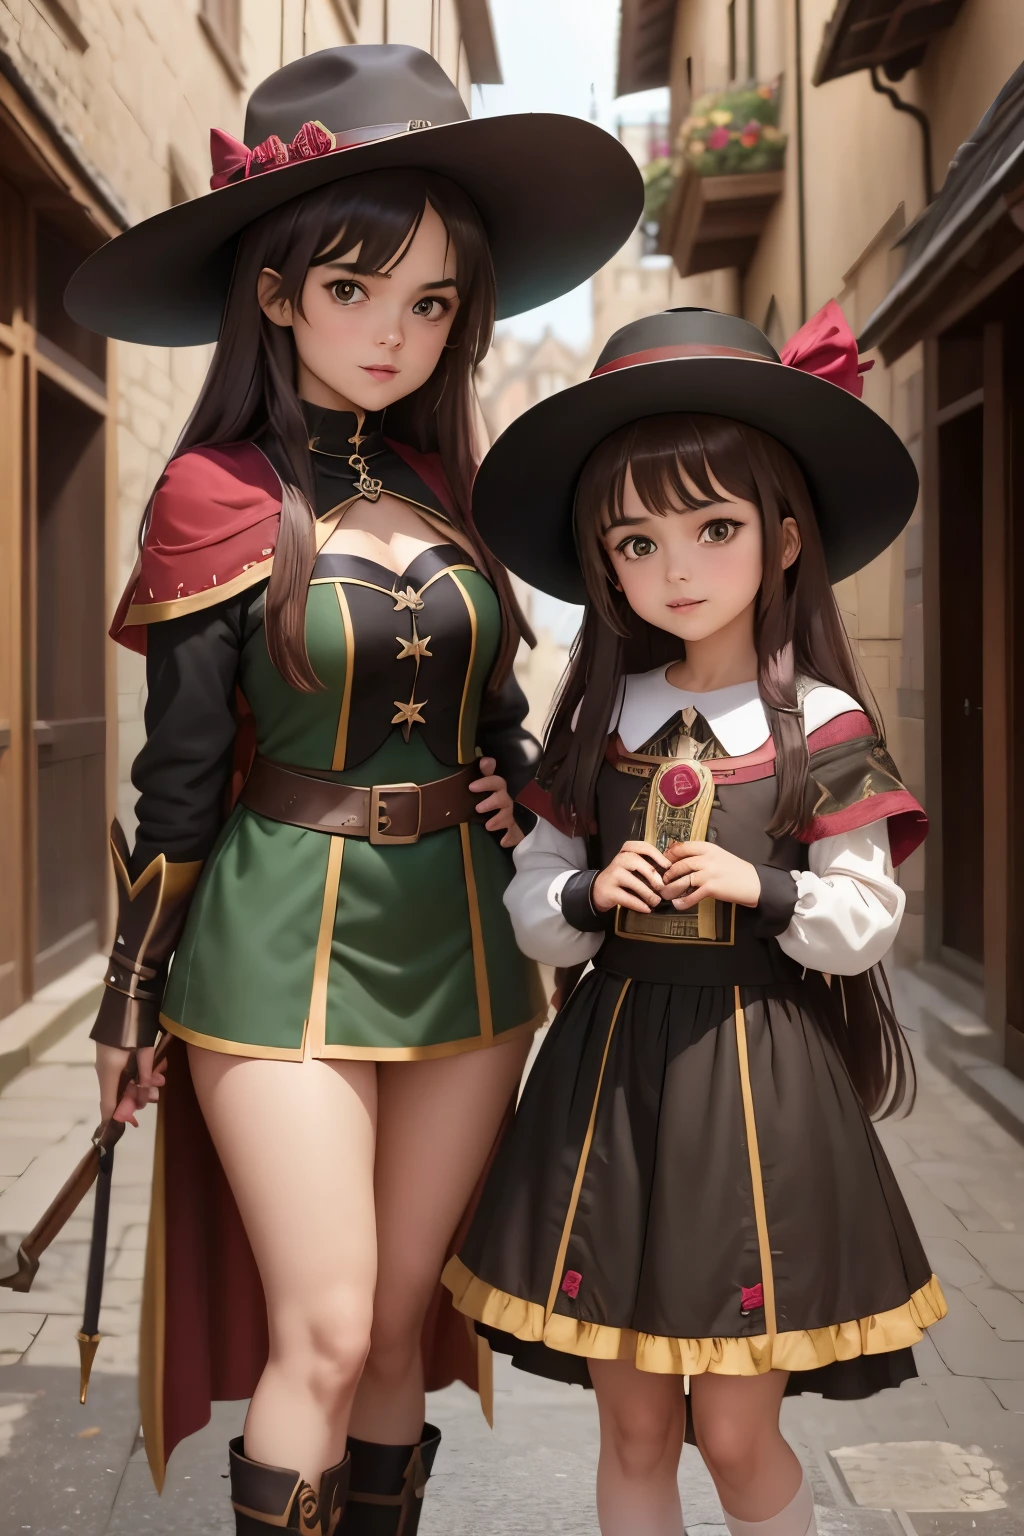 Megumin archimage and her daughter 13 years old Esmeralda archmage's apprentice (Have brunette color hair and dark green eyes, wearing sorcerer hats, medieval city, fight against enemy,